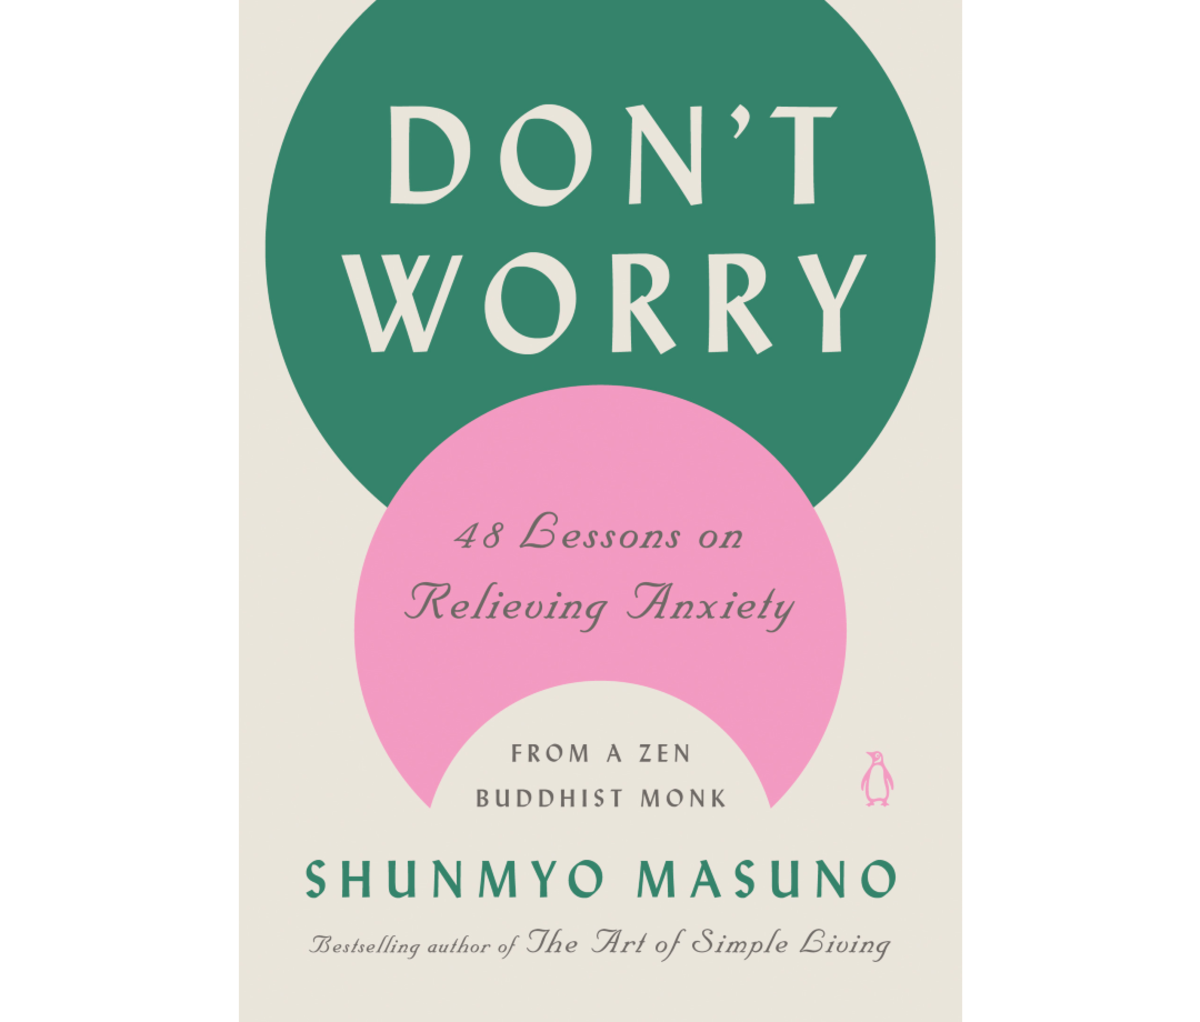 DON’T WORRY: 48 Lessons on Relieving Anxiety from a Zen Buddhist Monk by Shunmyo Masuno